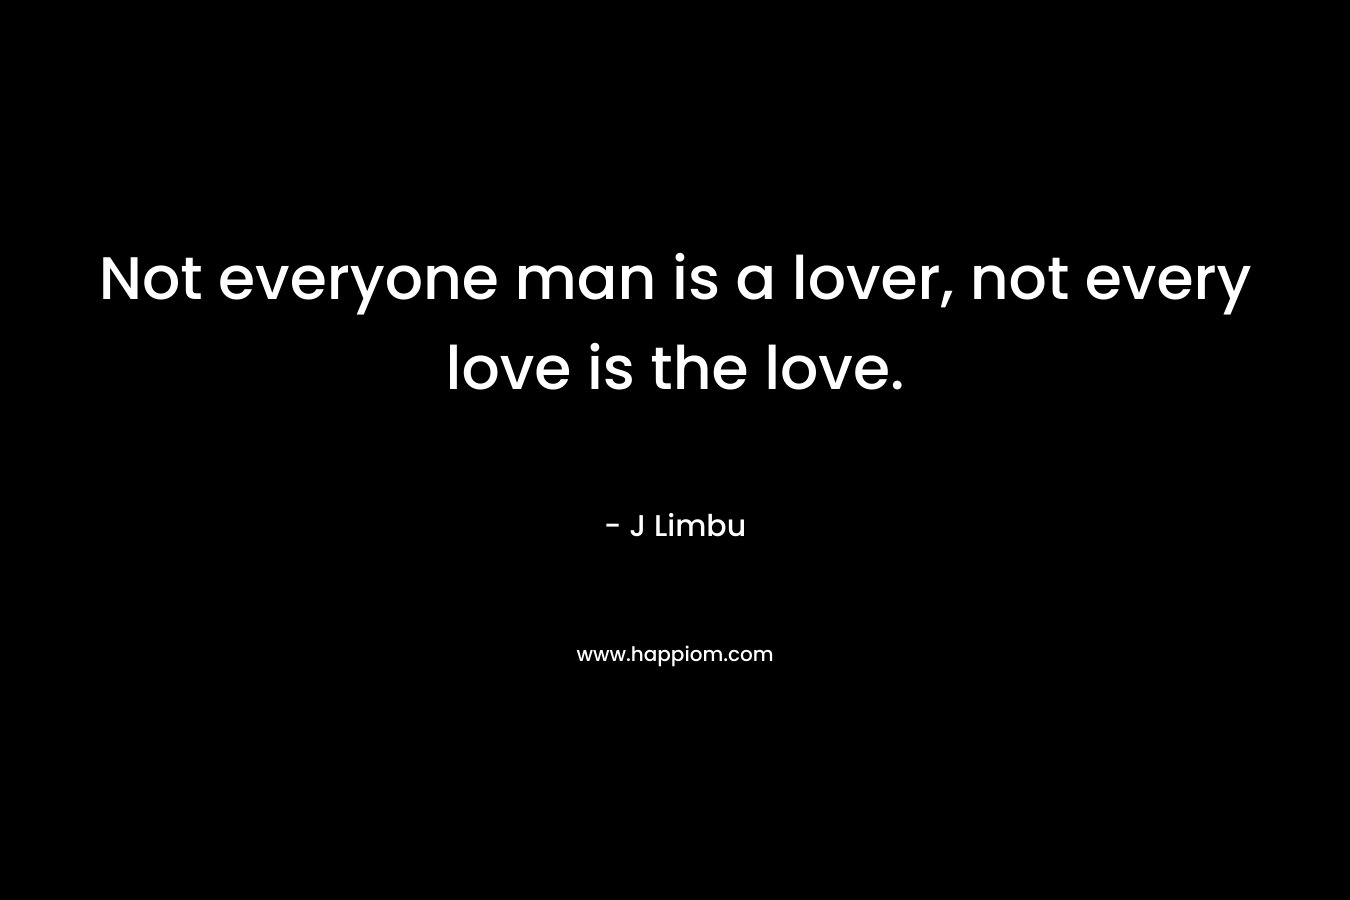 Not everyone man is a lover, not every love is the love.